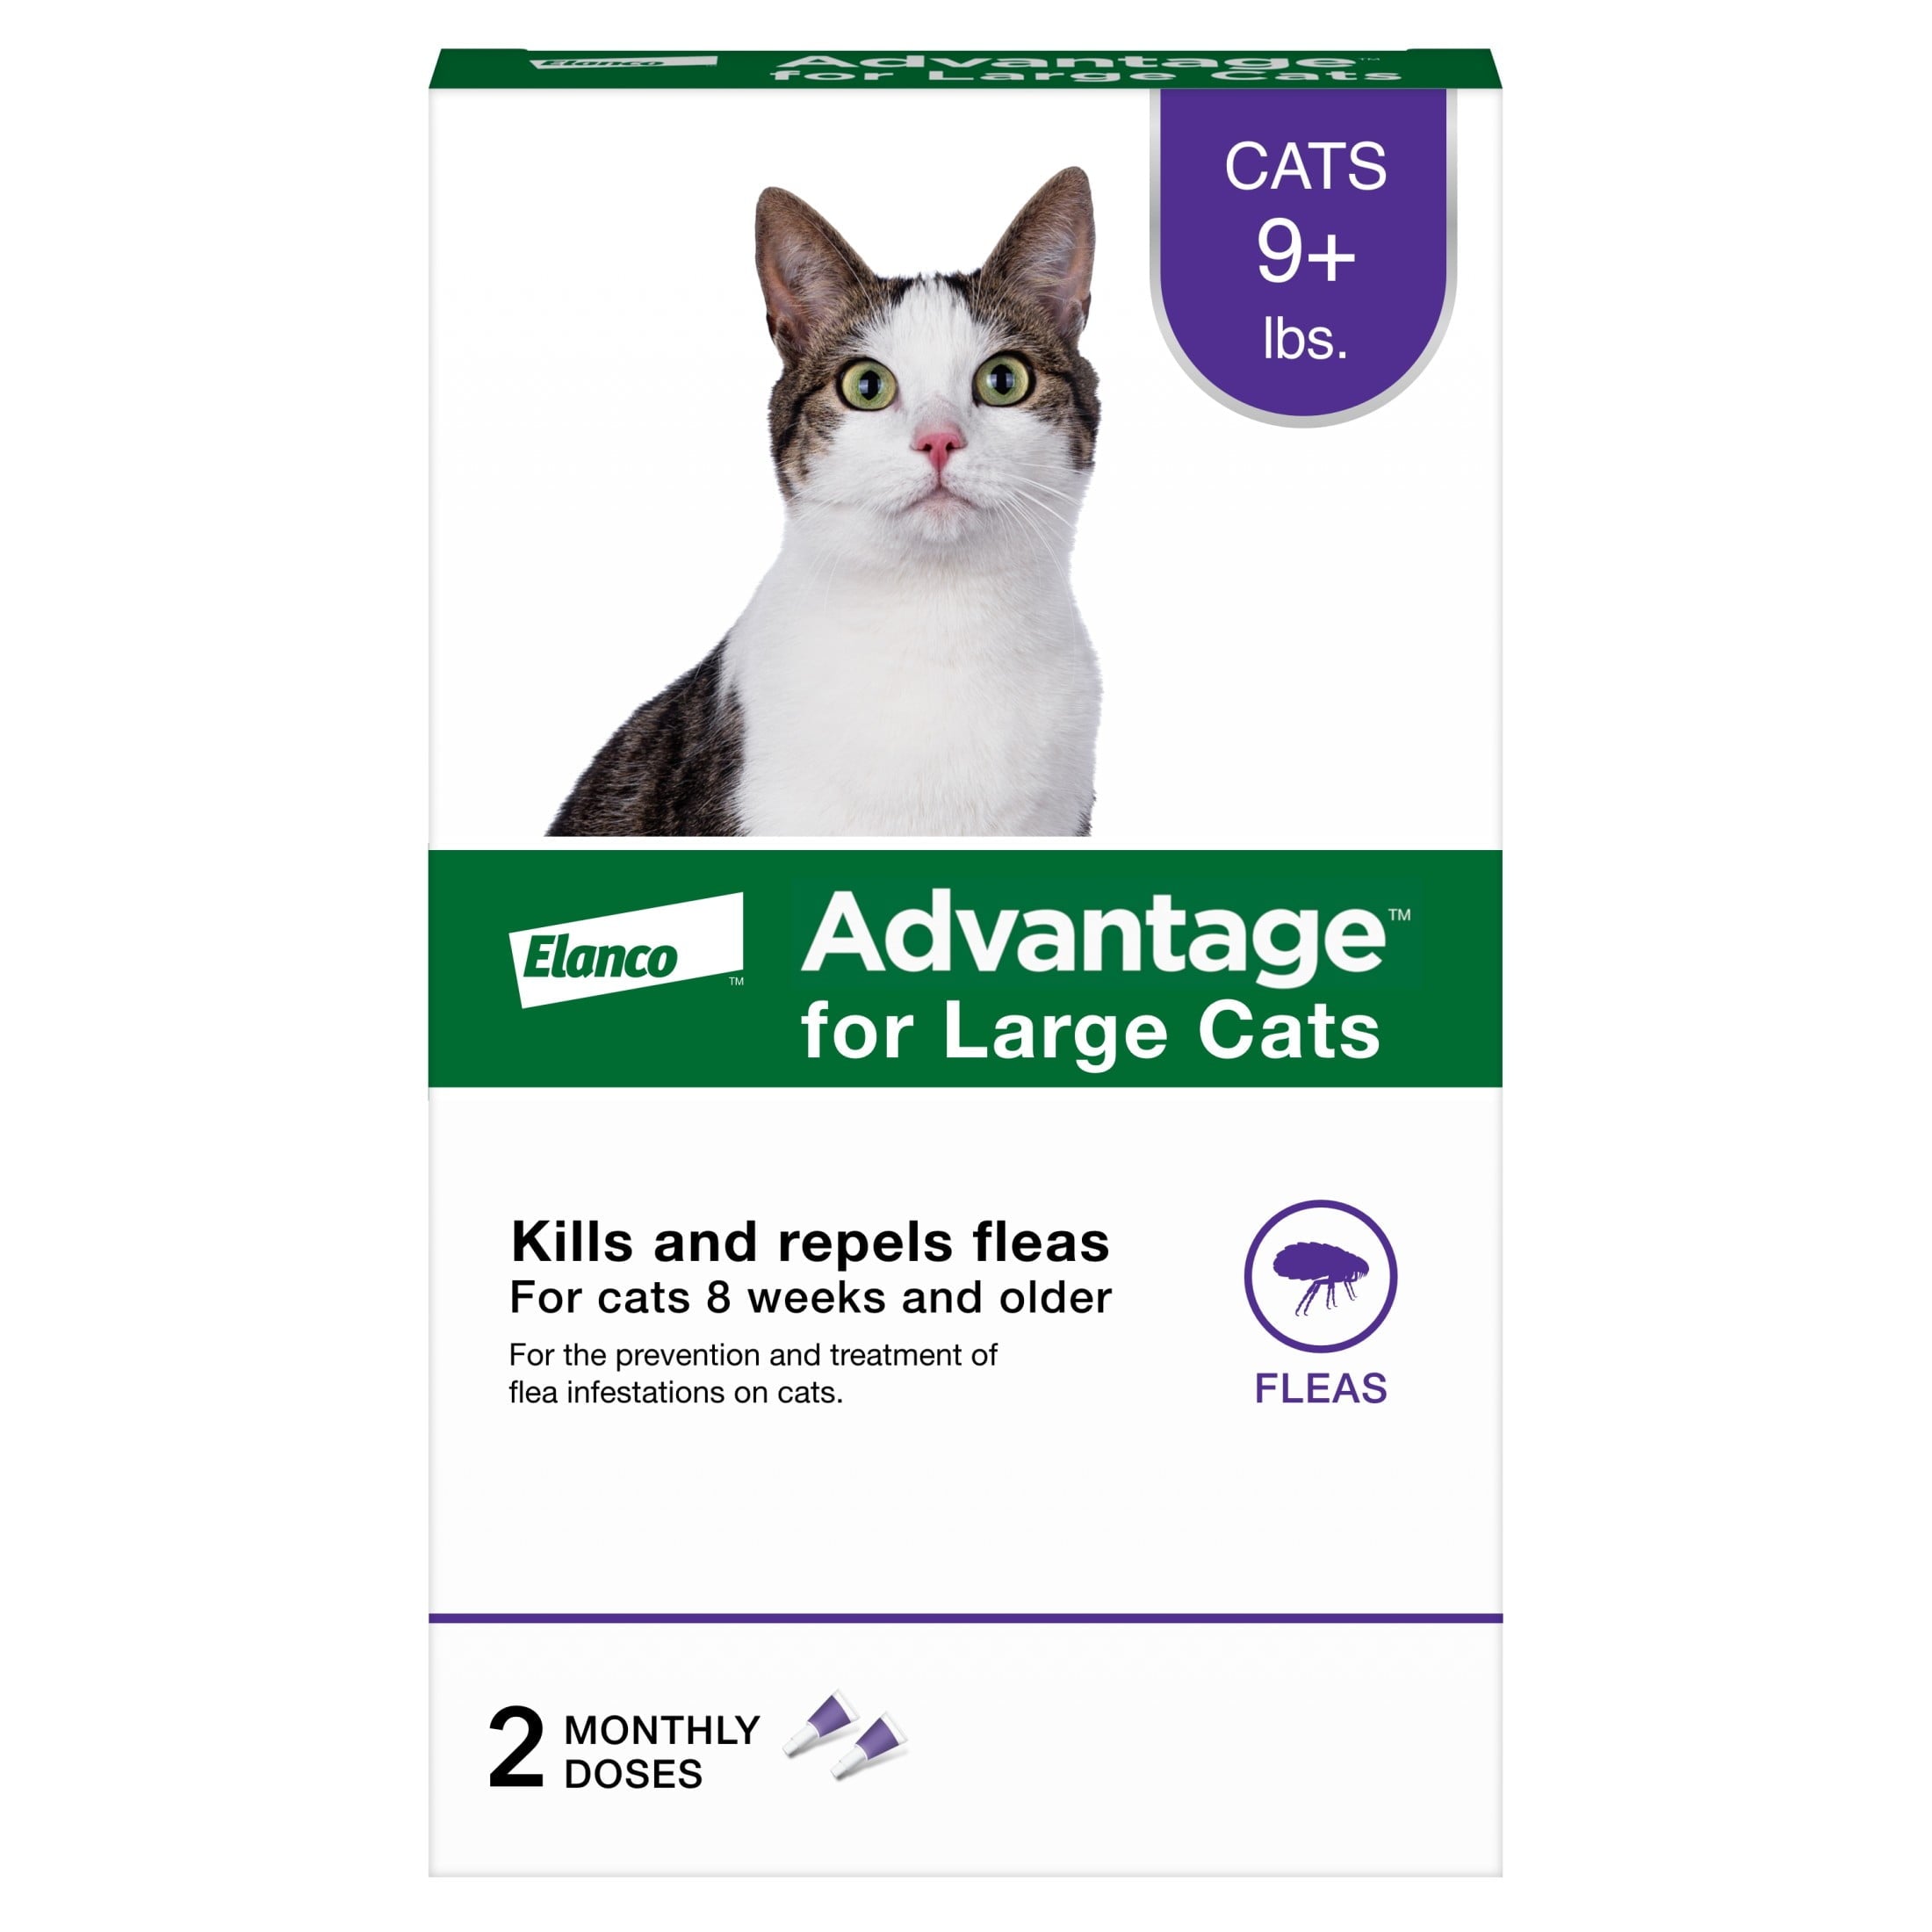 Wholesale prices with free shipping all over United States Advantage Topical Flea Prevention For Large Cats 9 lbs+, 2-Monthly Treatments - Steven Deals